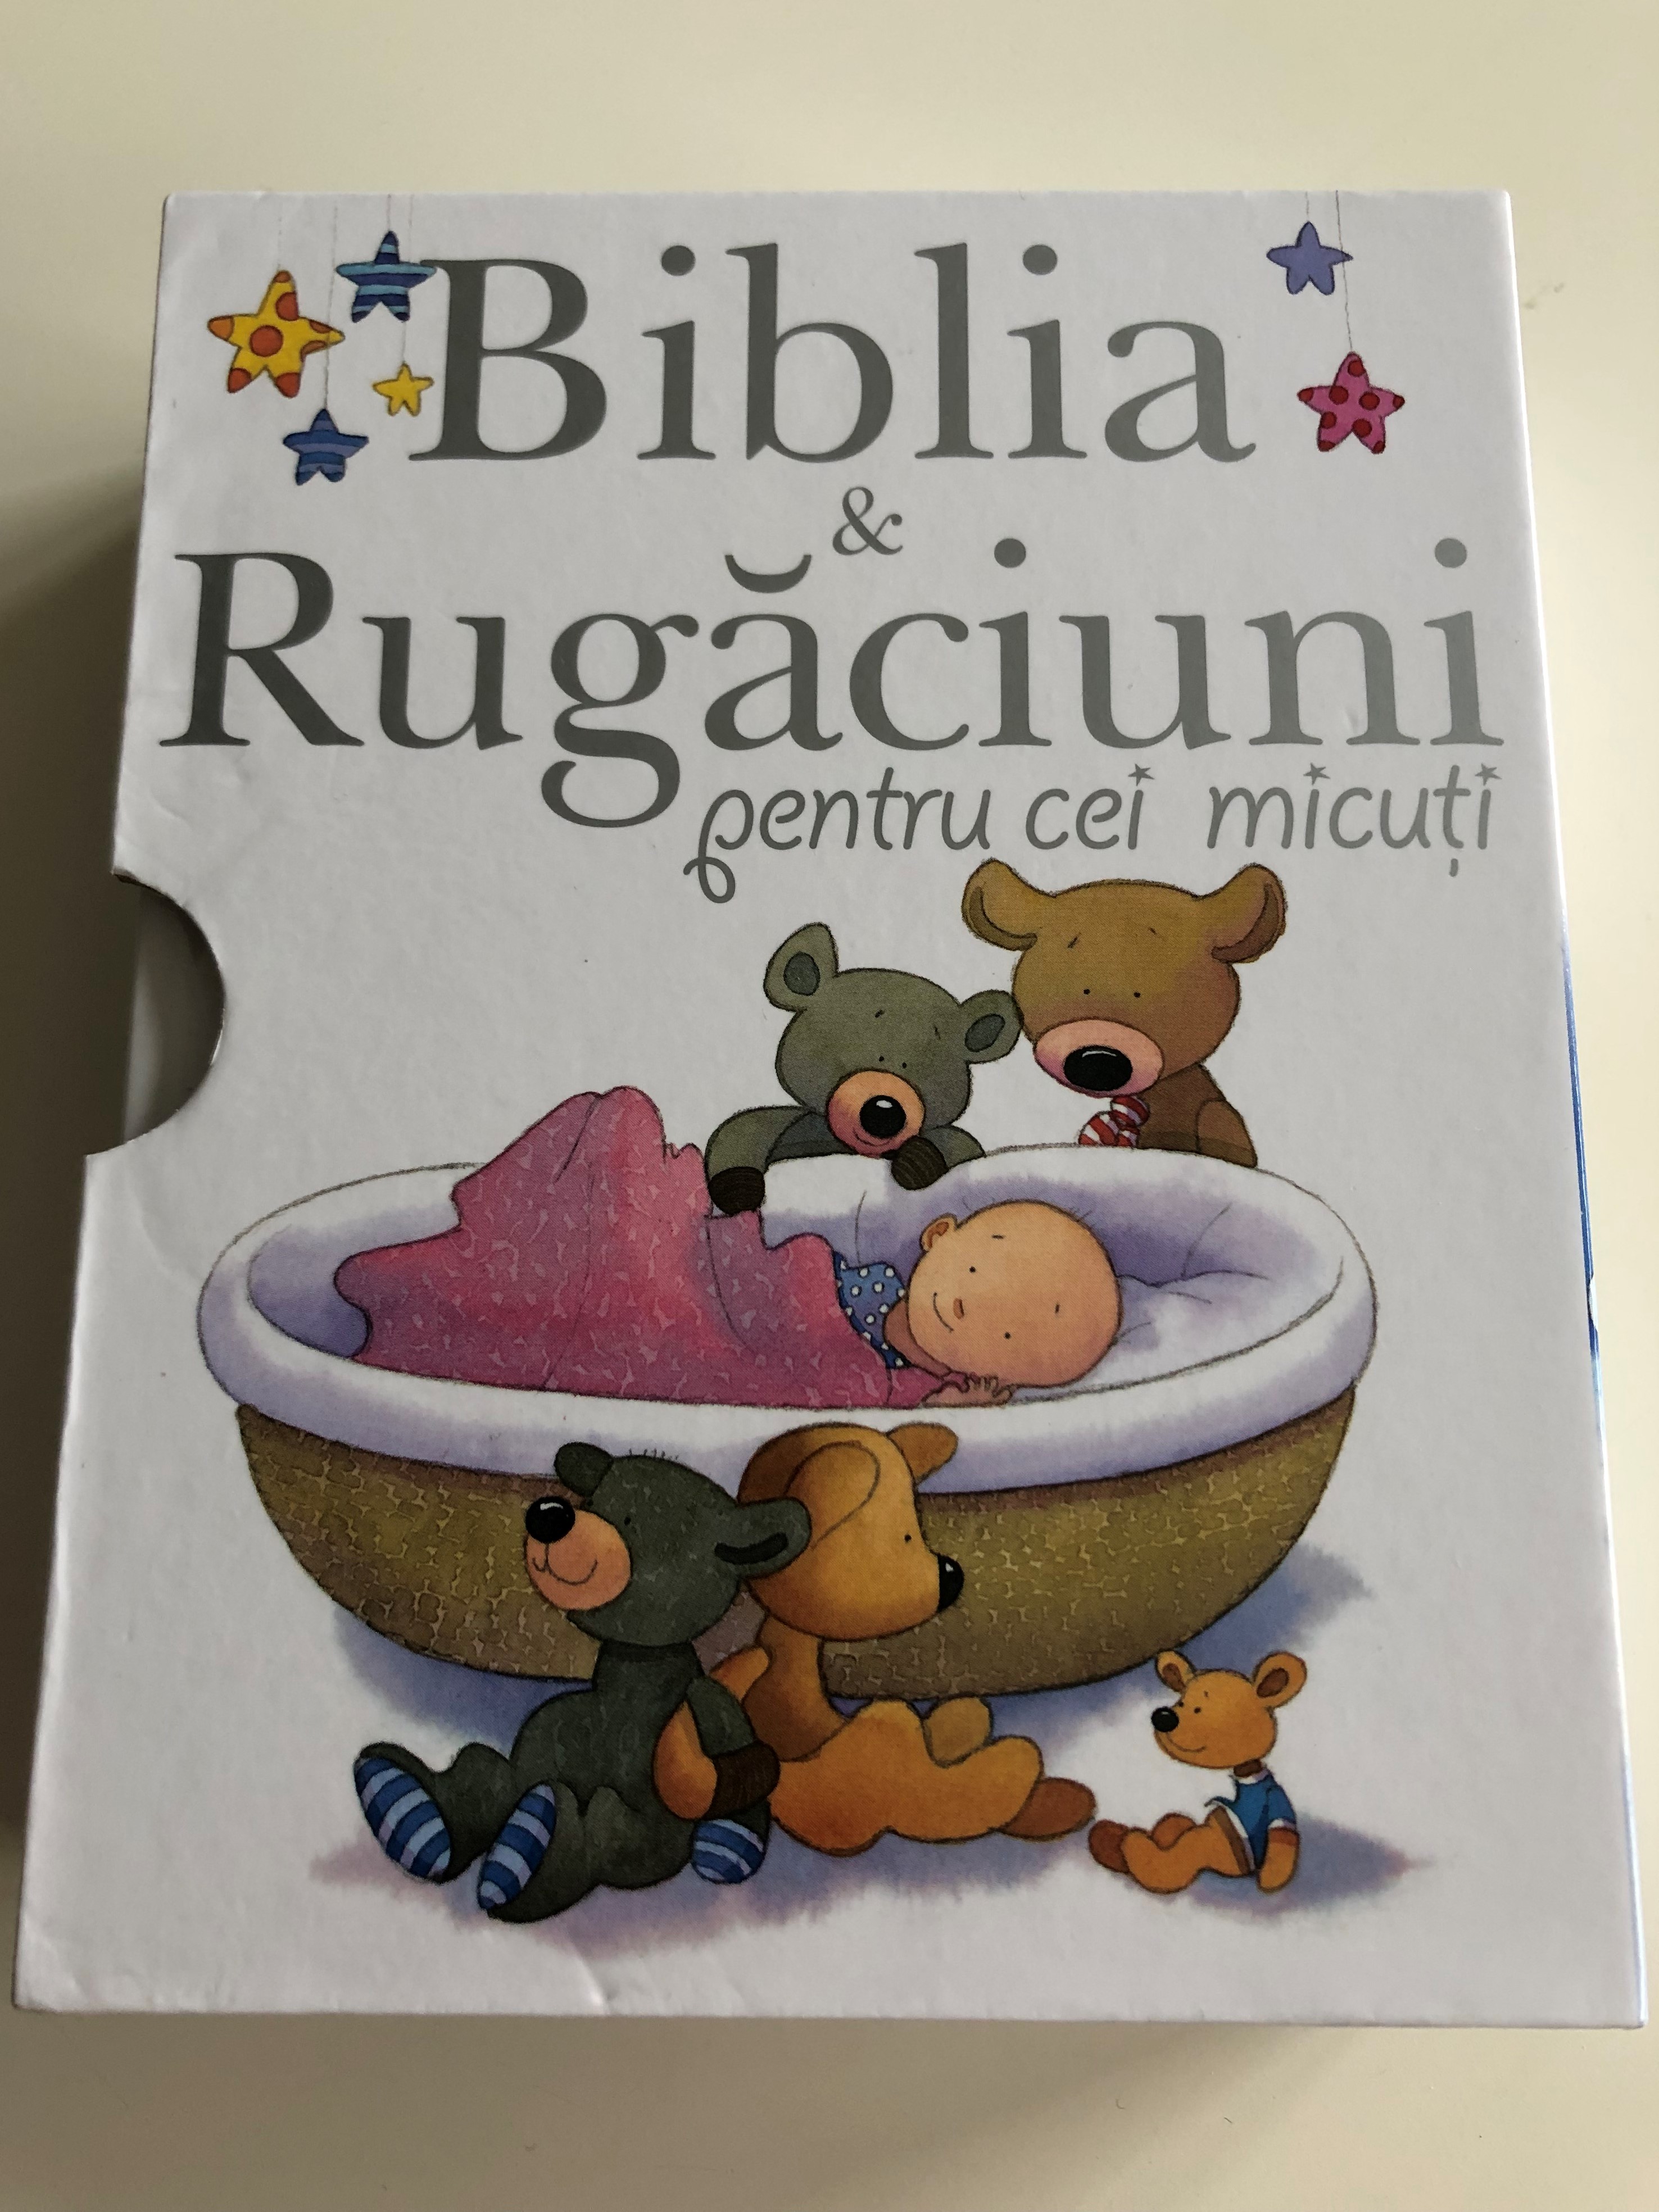 biblia-rug-ciuni-pentru-cei-micuti-by-sarag-toulmin-romanian-translation-of-baby-bible-and-baby-prayers-lion-hudson-comes-in-a-protective-box-baby-bible-for-children-between-1-3-years-illustrations-by-kristina-stephe-1-.jpg